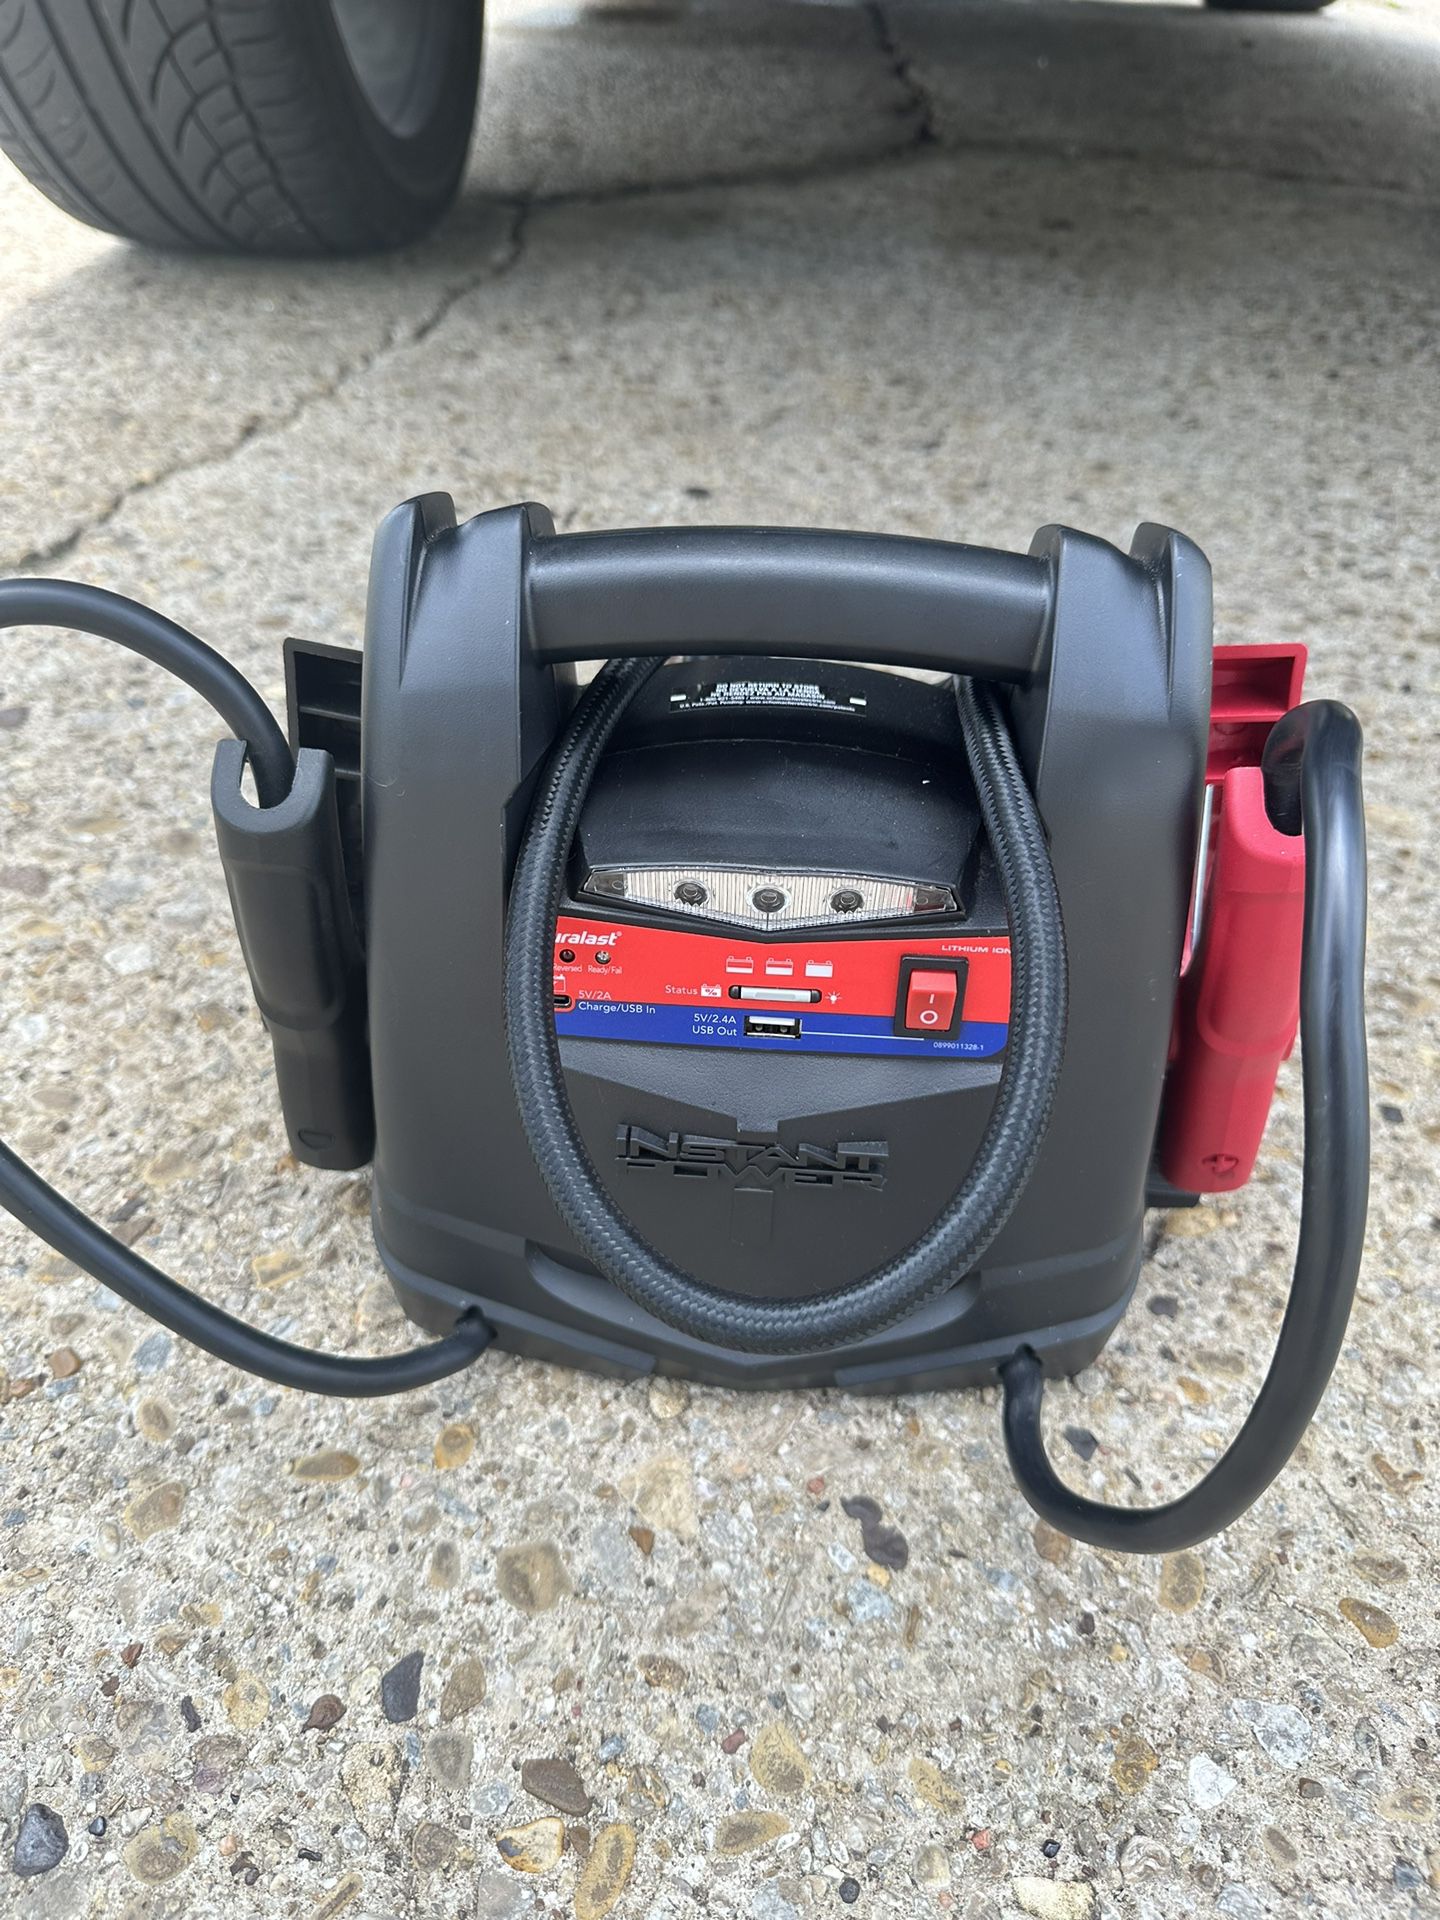 Duralast Instant Power Jumper And Compressor $100 Today